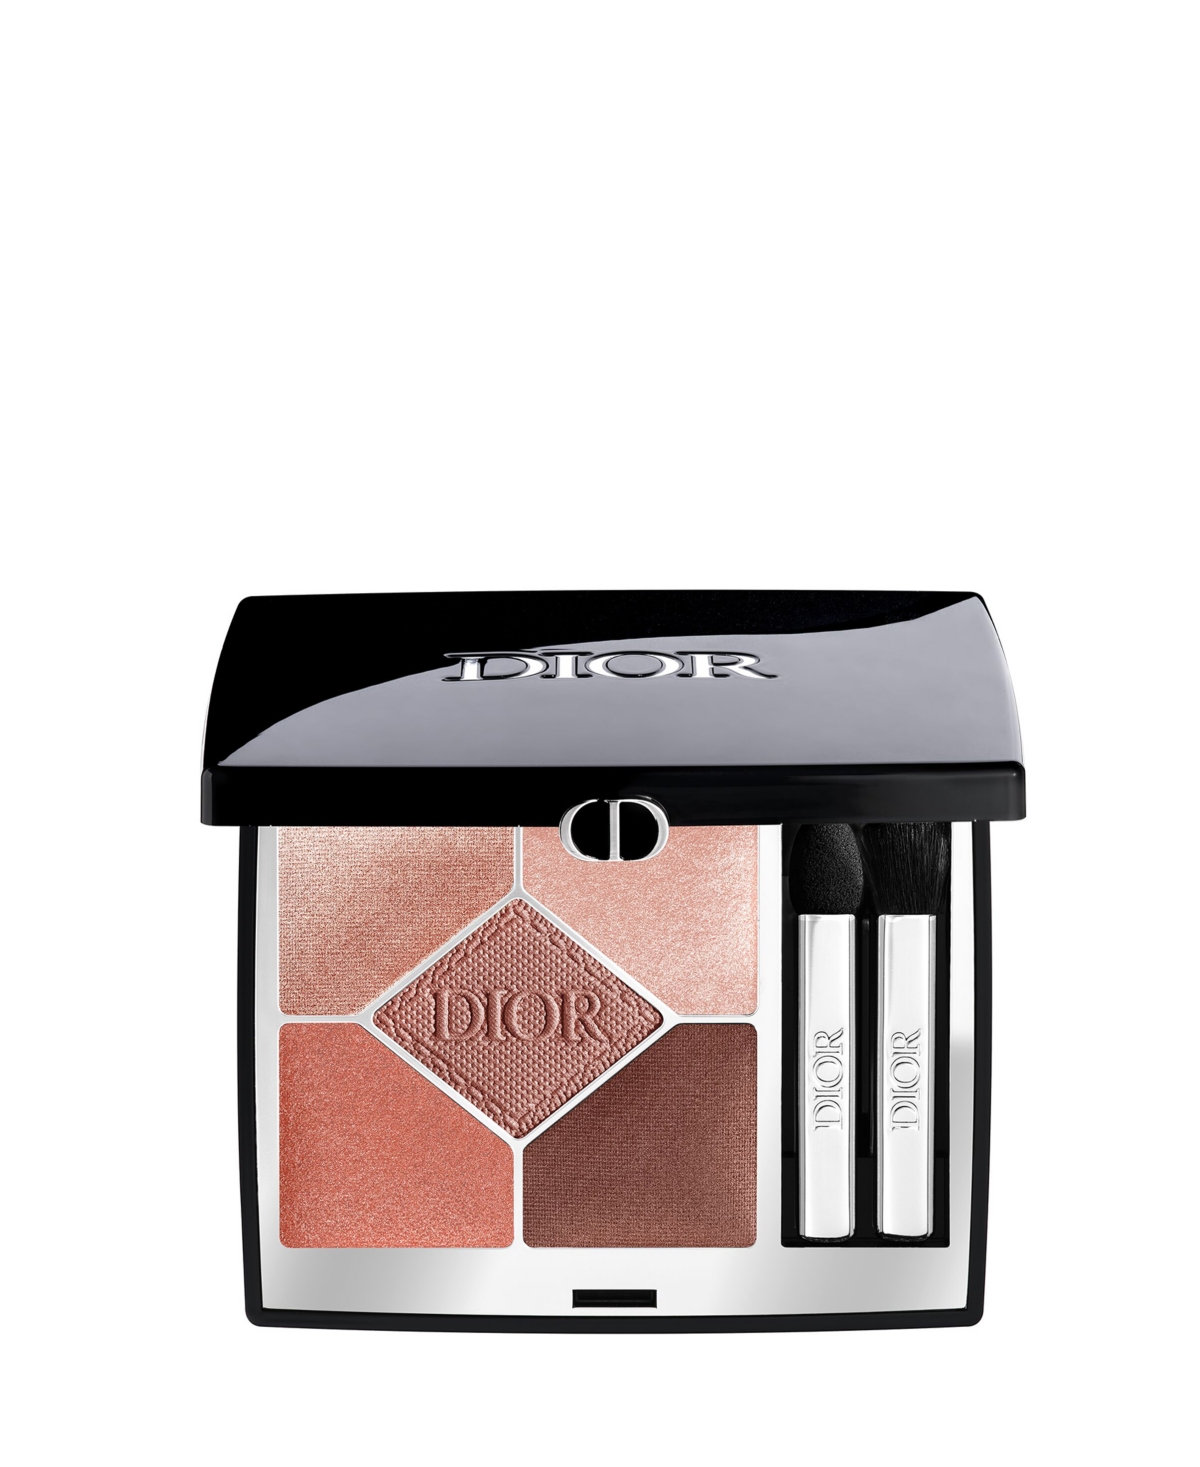 Dior Show 5 Couleurs Couture Eyeshadow Palette In Toile De Jouy